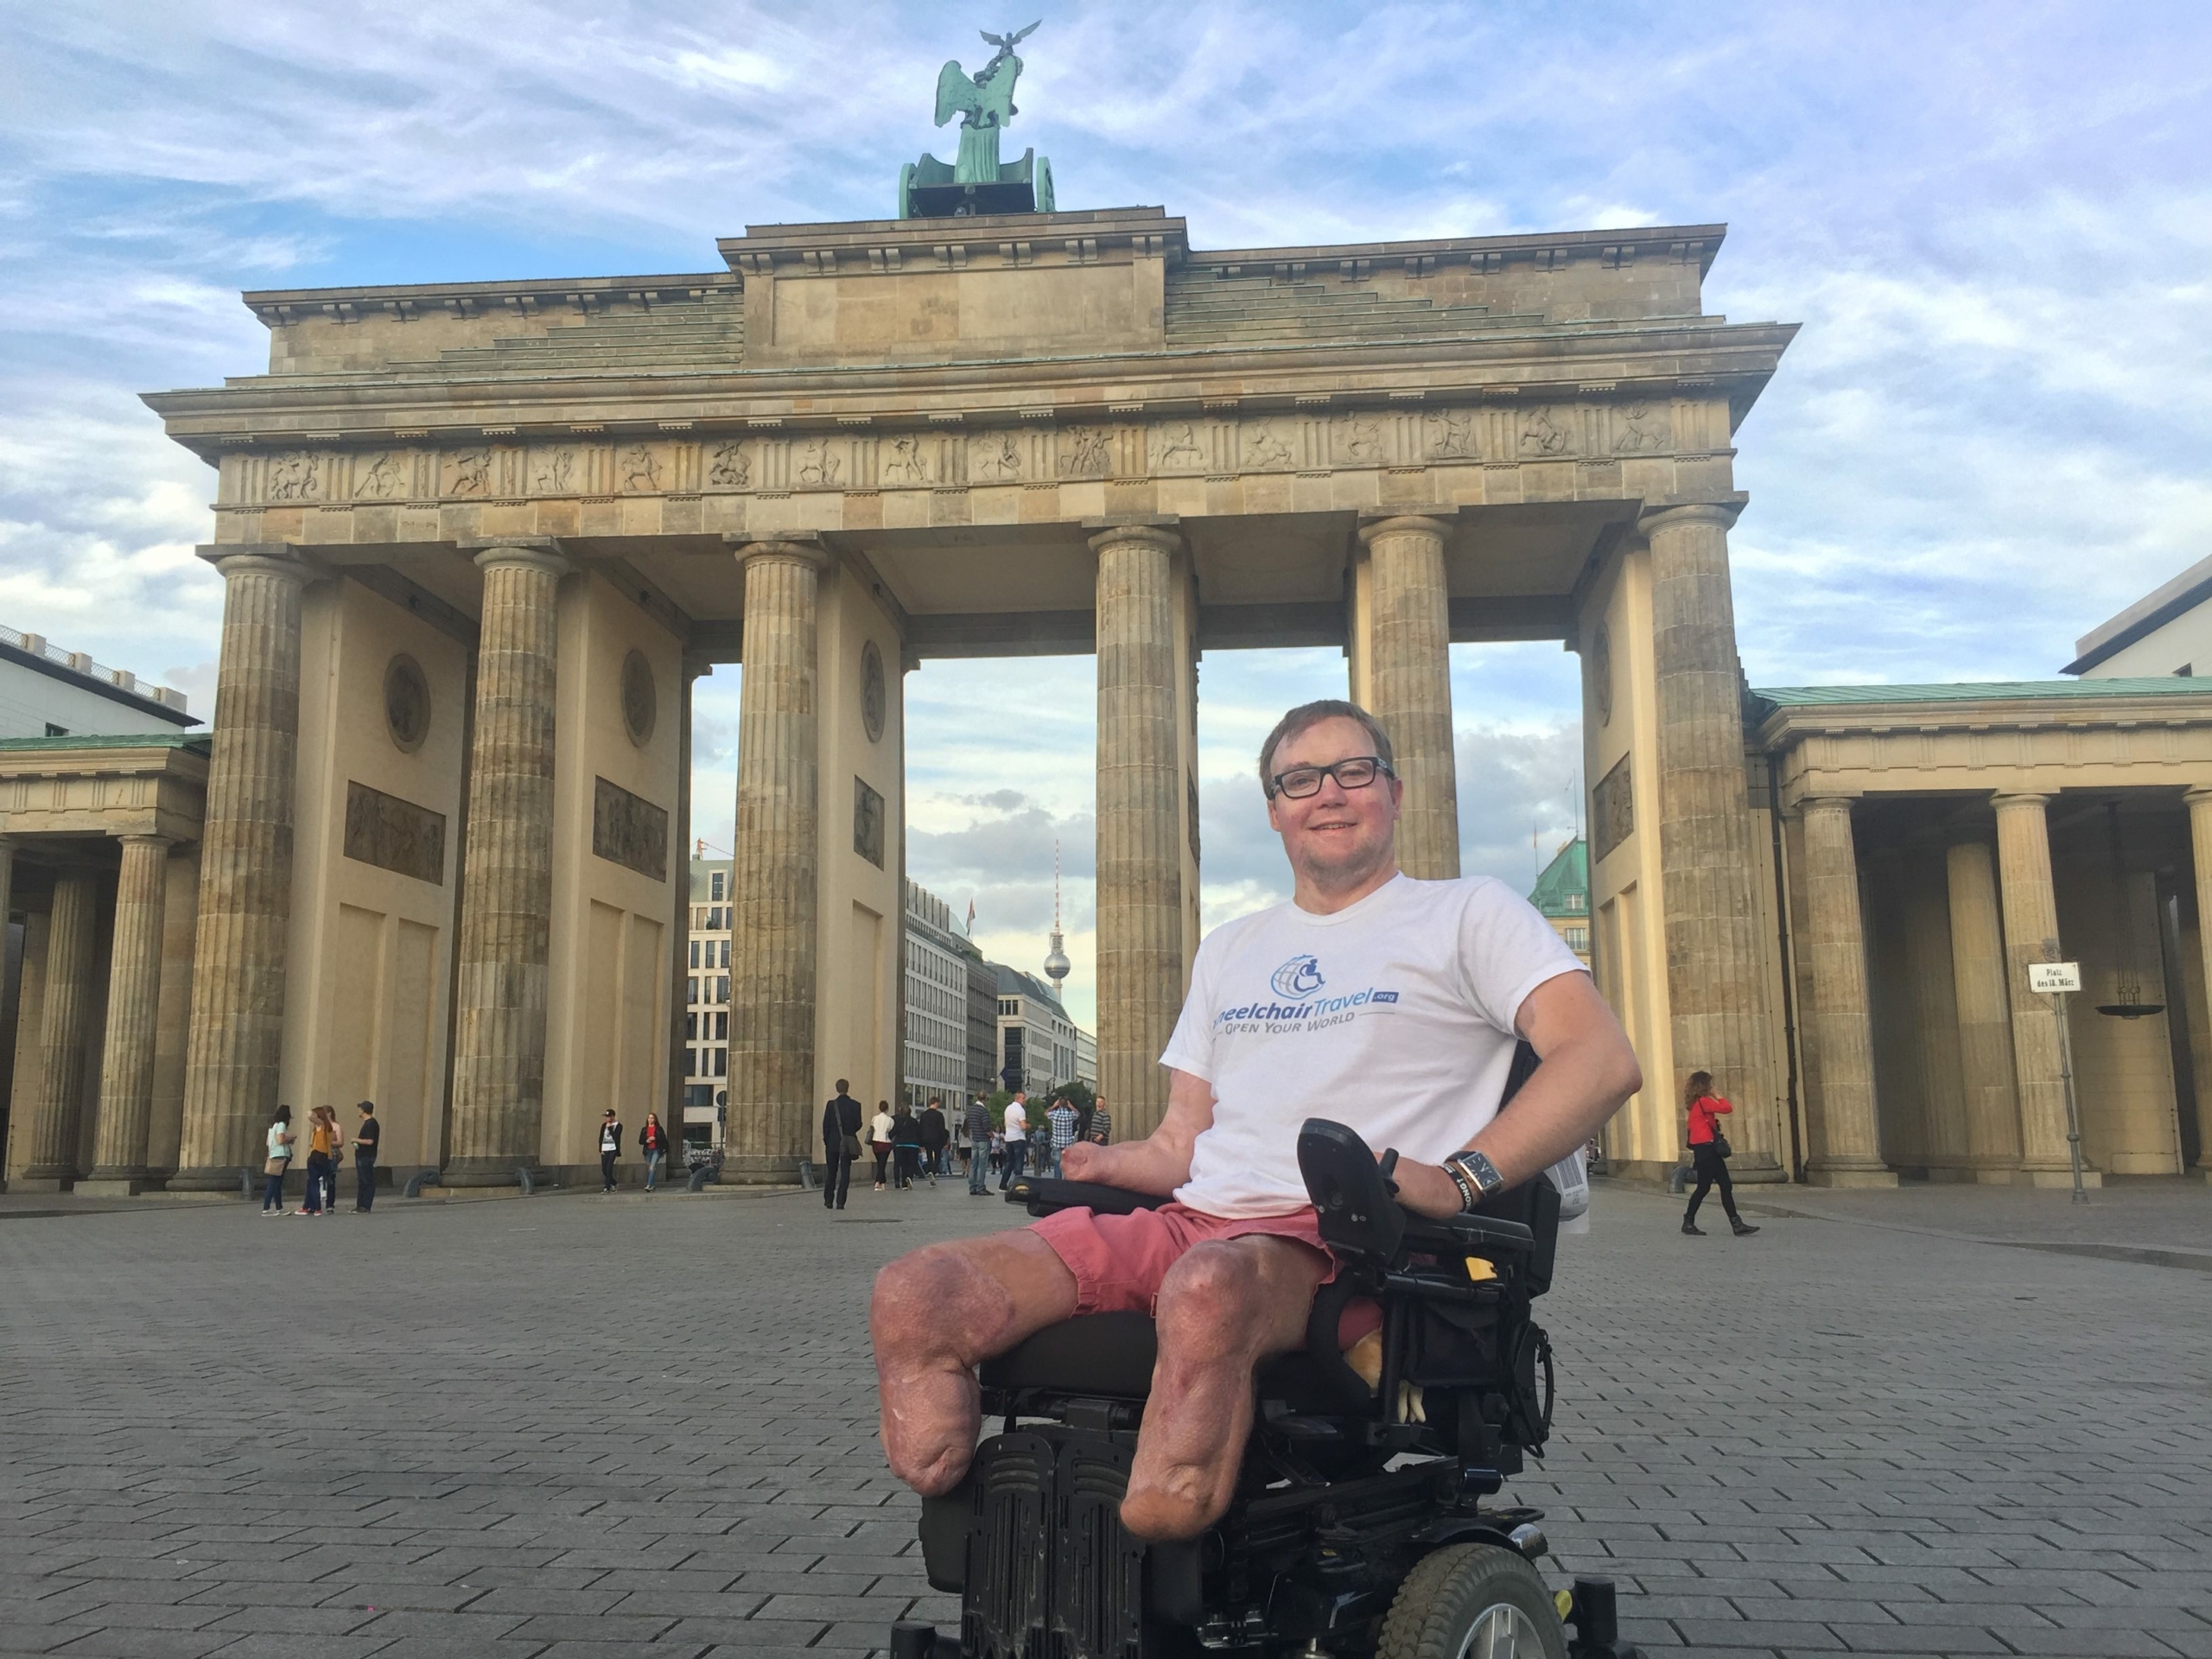 power wheelchair user shown smiling in front of monument